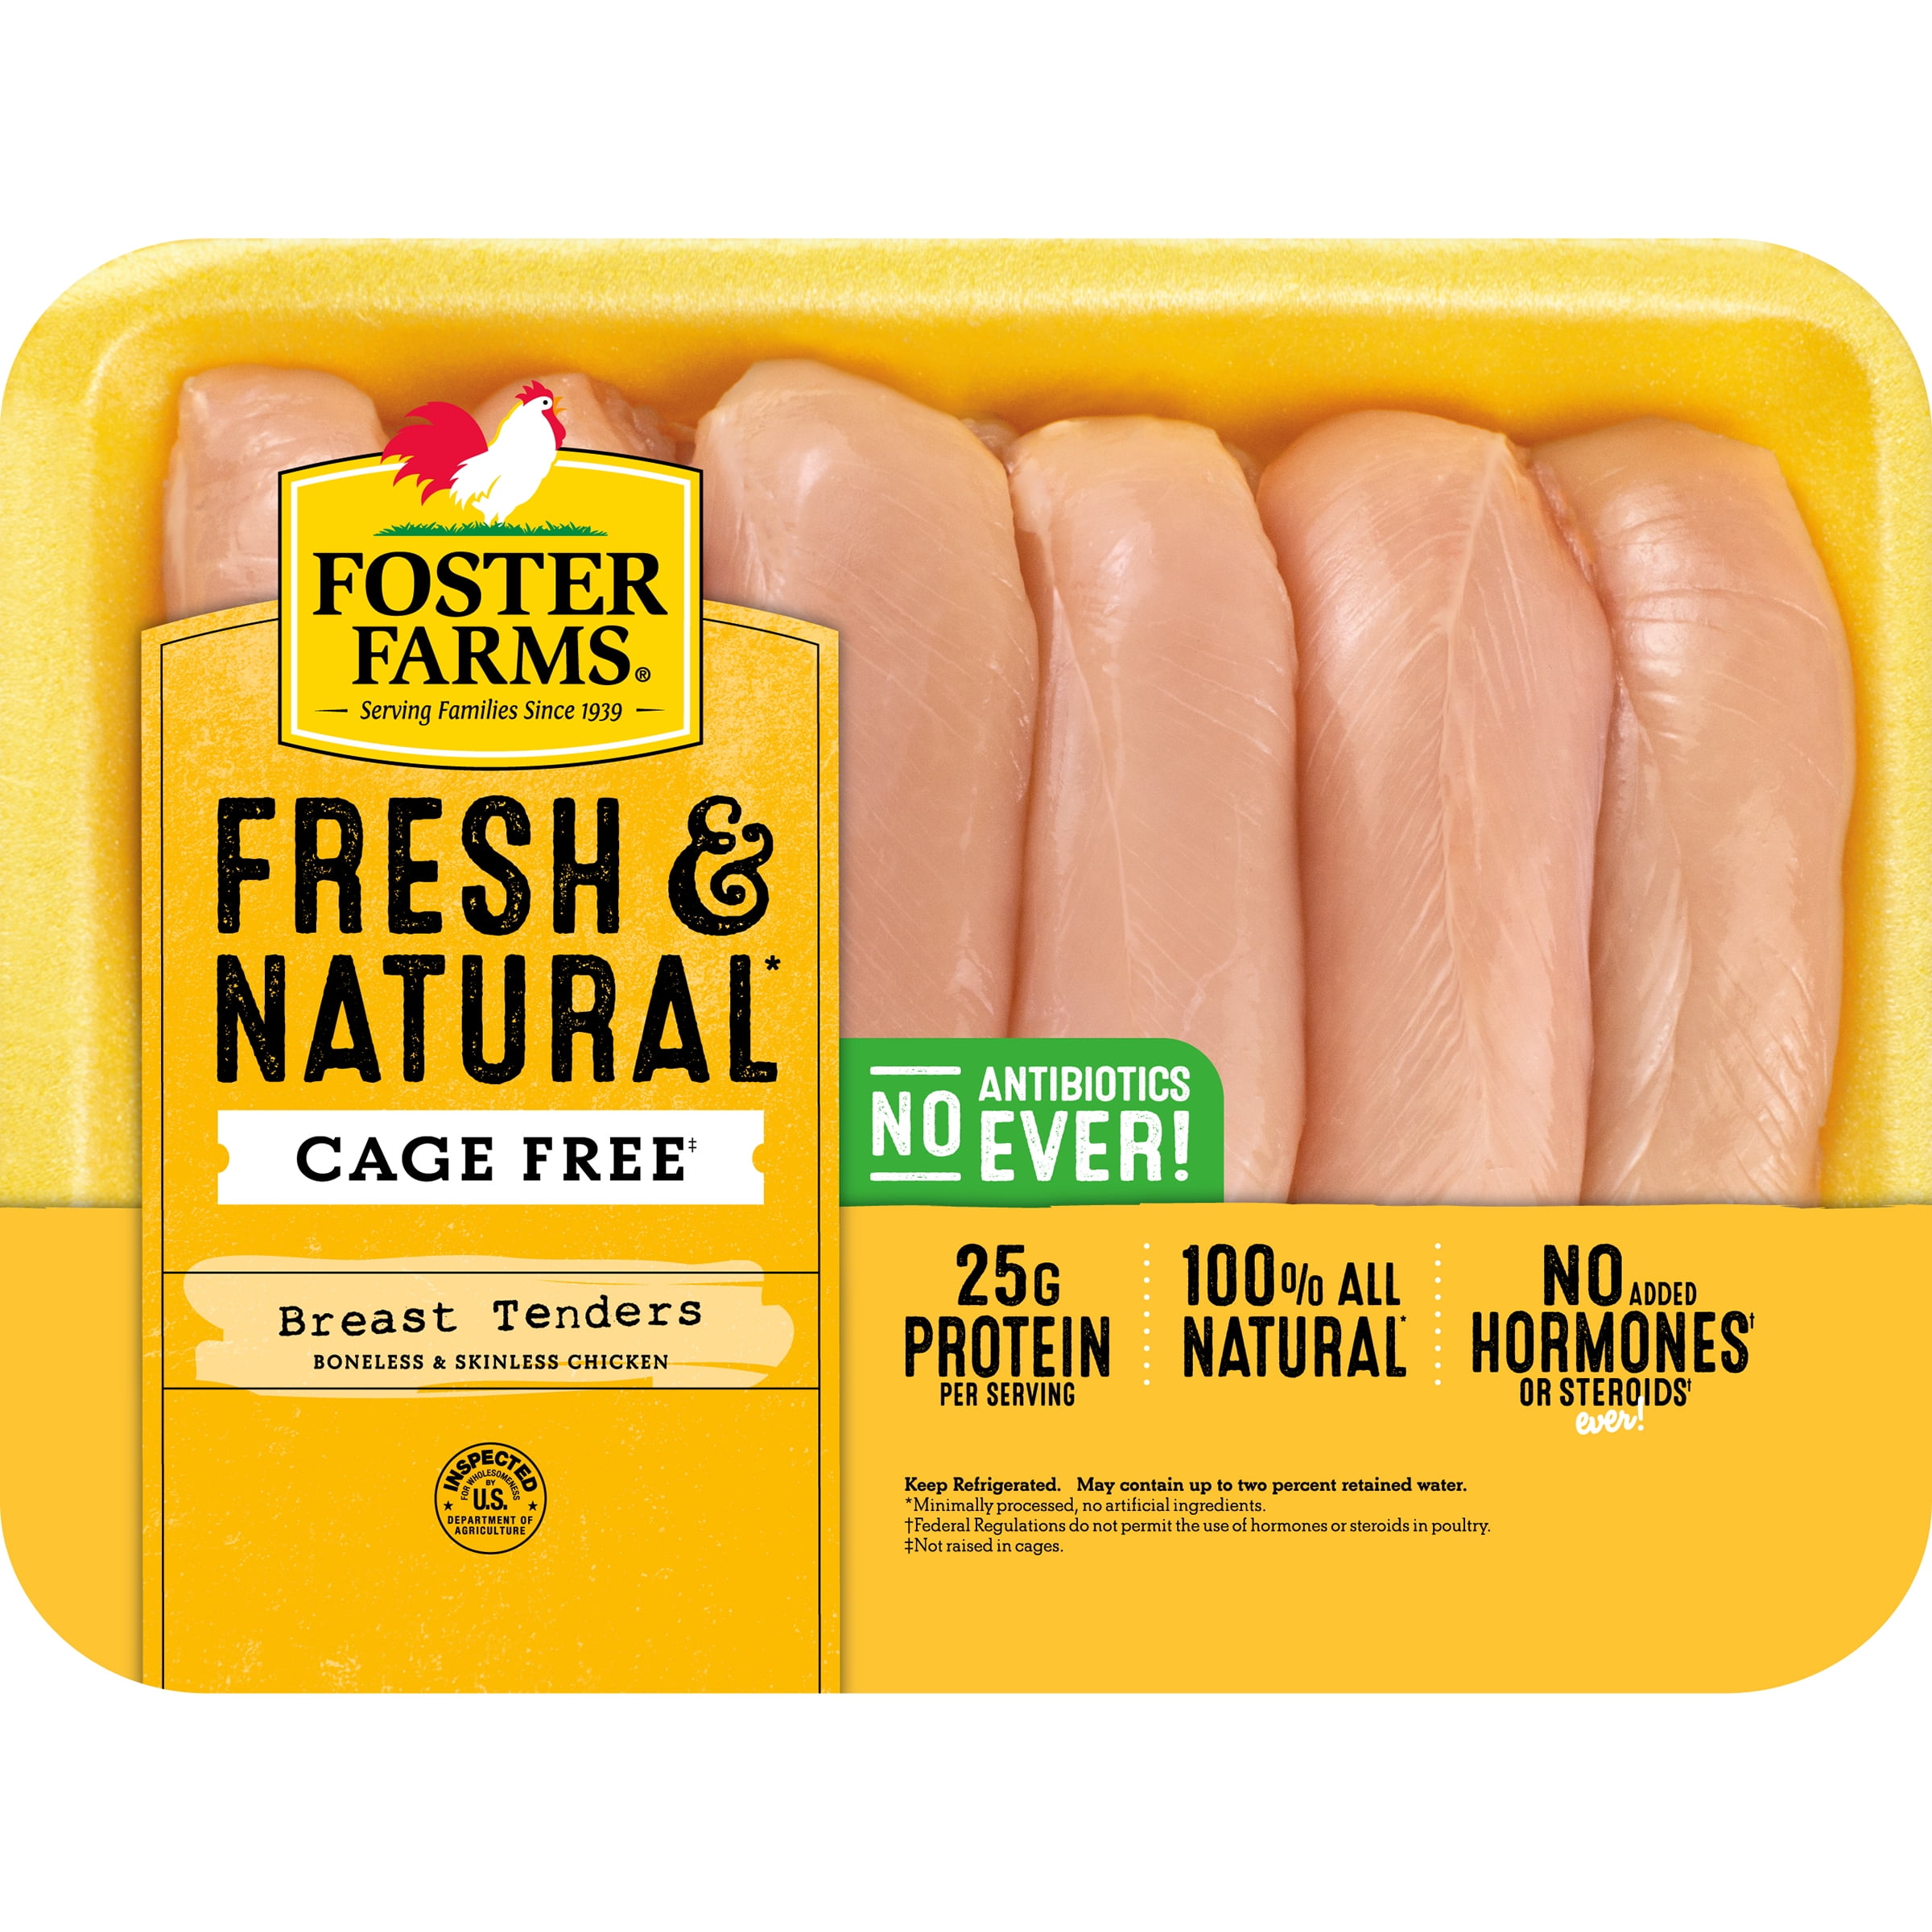 Save on Giant Chicken Breasts Boneless Skinless 99% Fat Free - 3 ct Fresh  Order Online Delivery